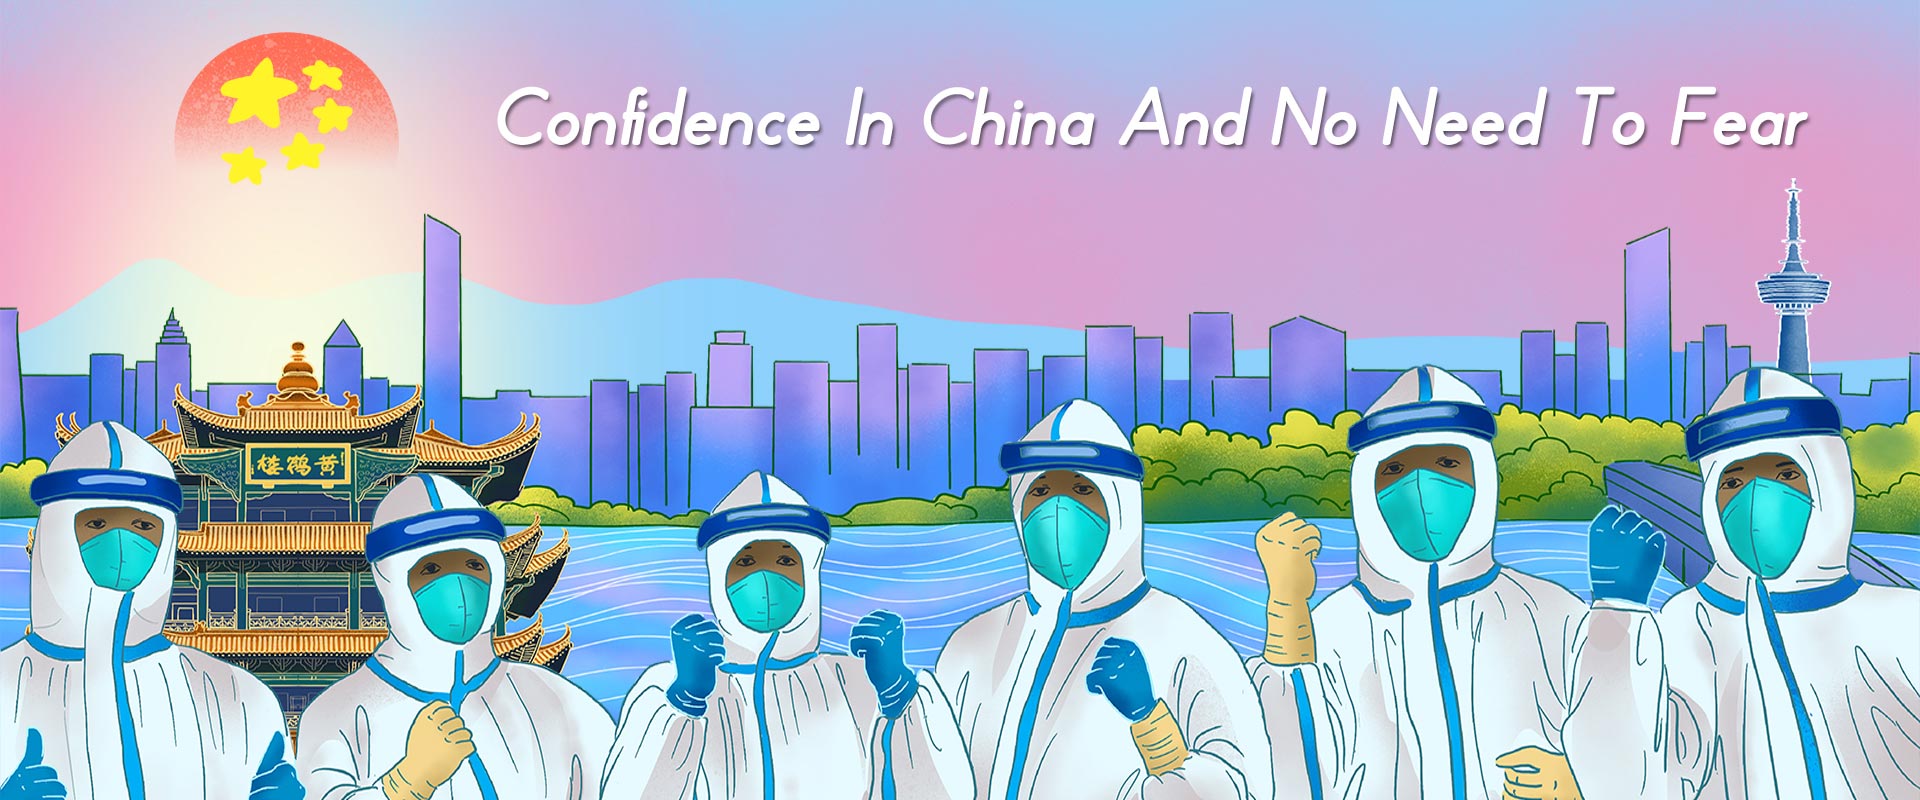 Confidence In China And No Need To Fear